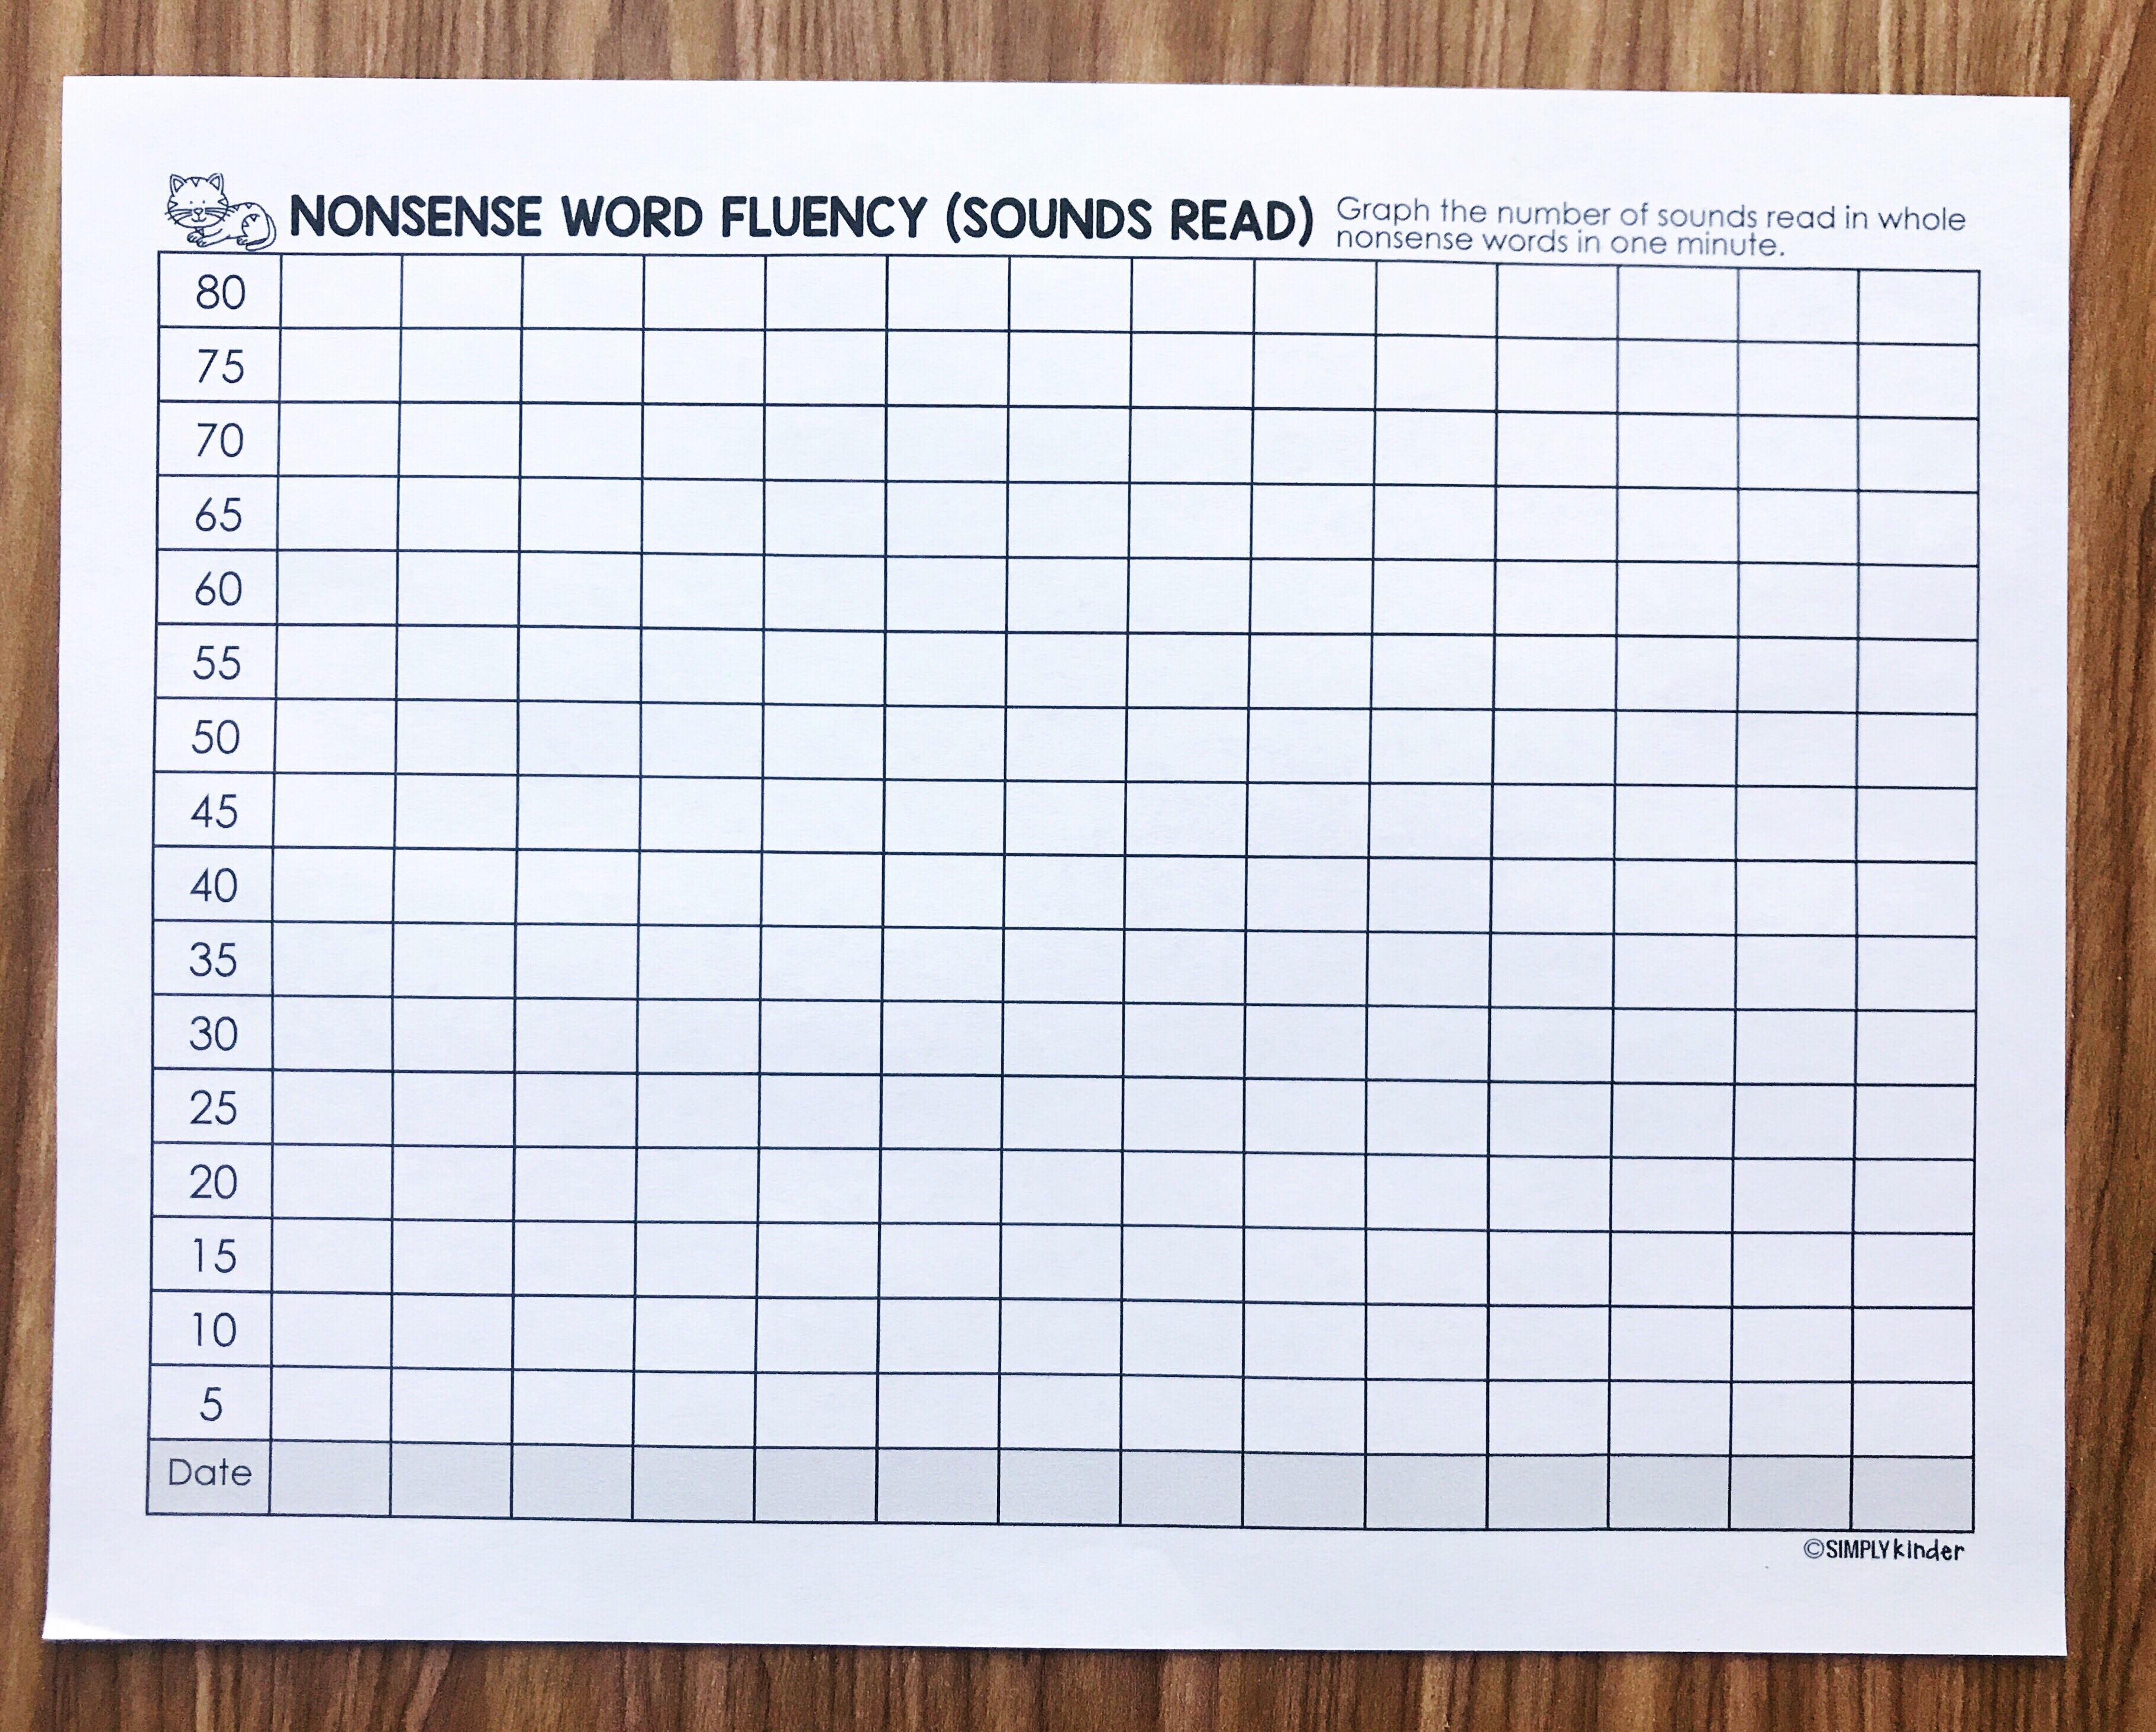 Help your students track their nonsense word fluency progress with this free student data book from Simply Kinder. 